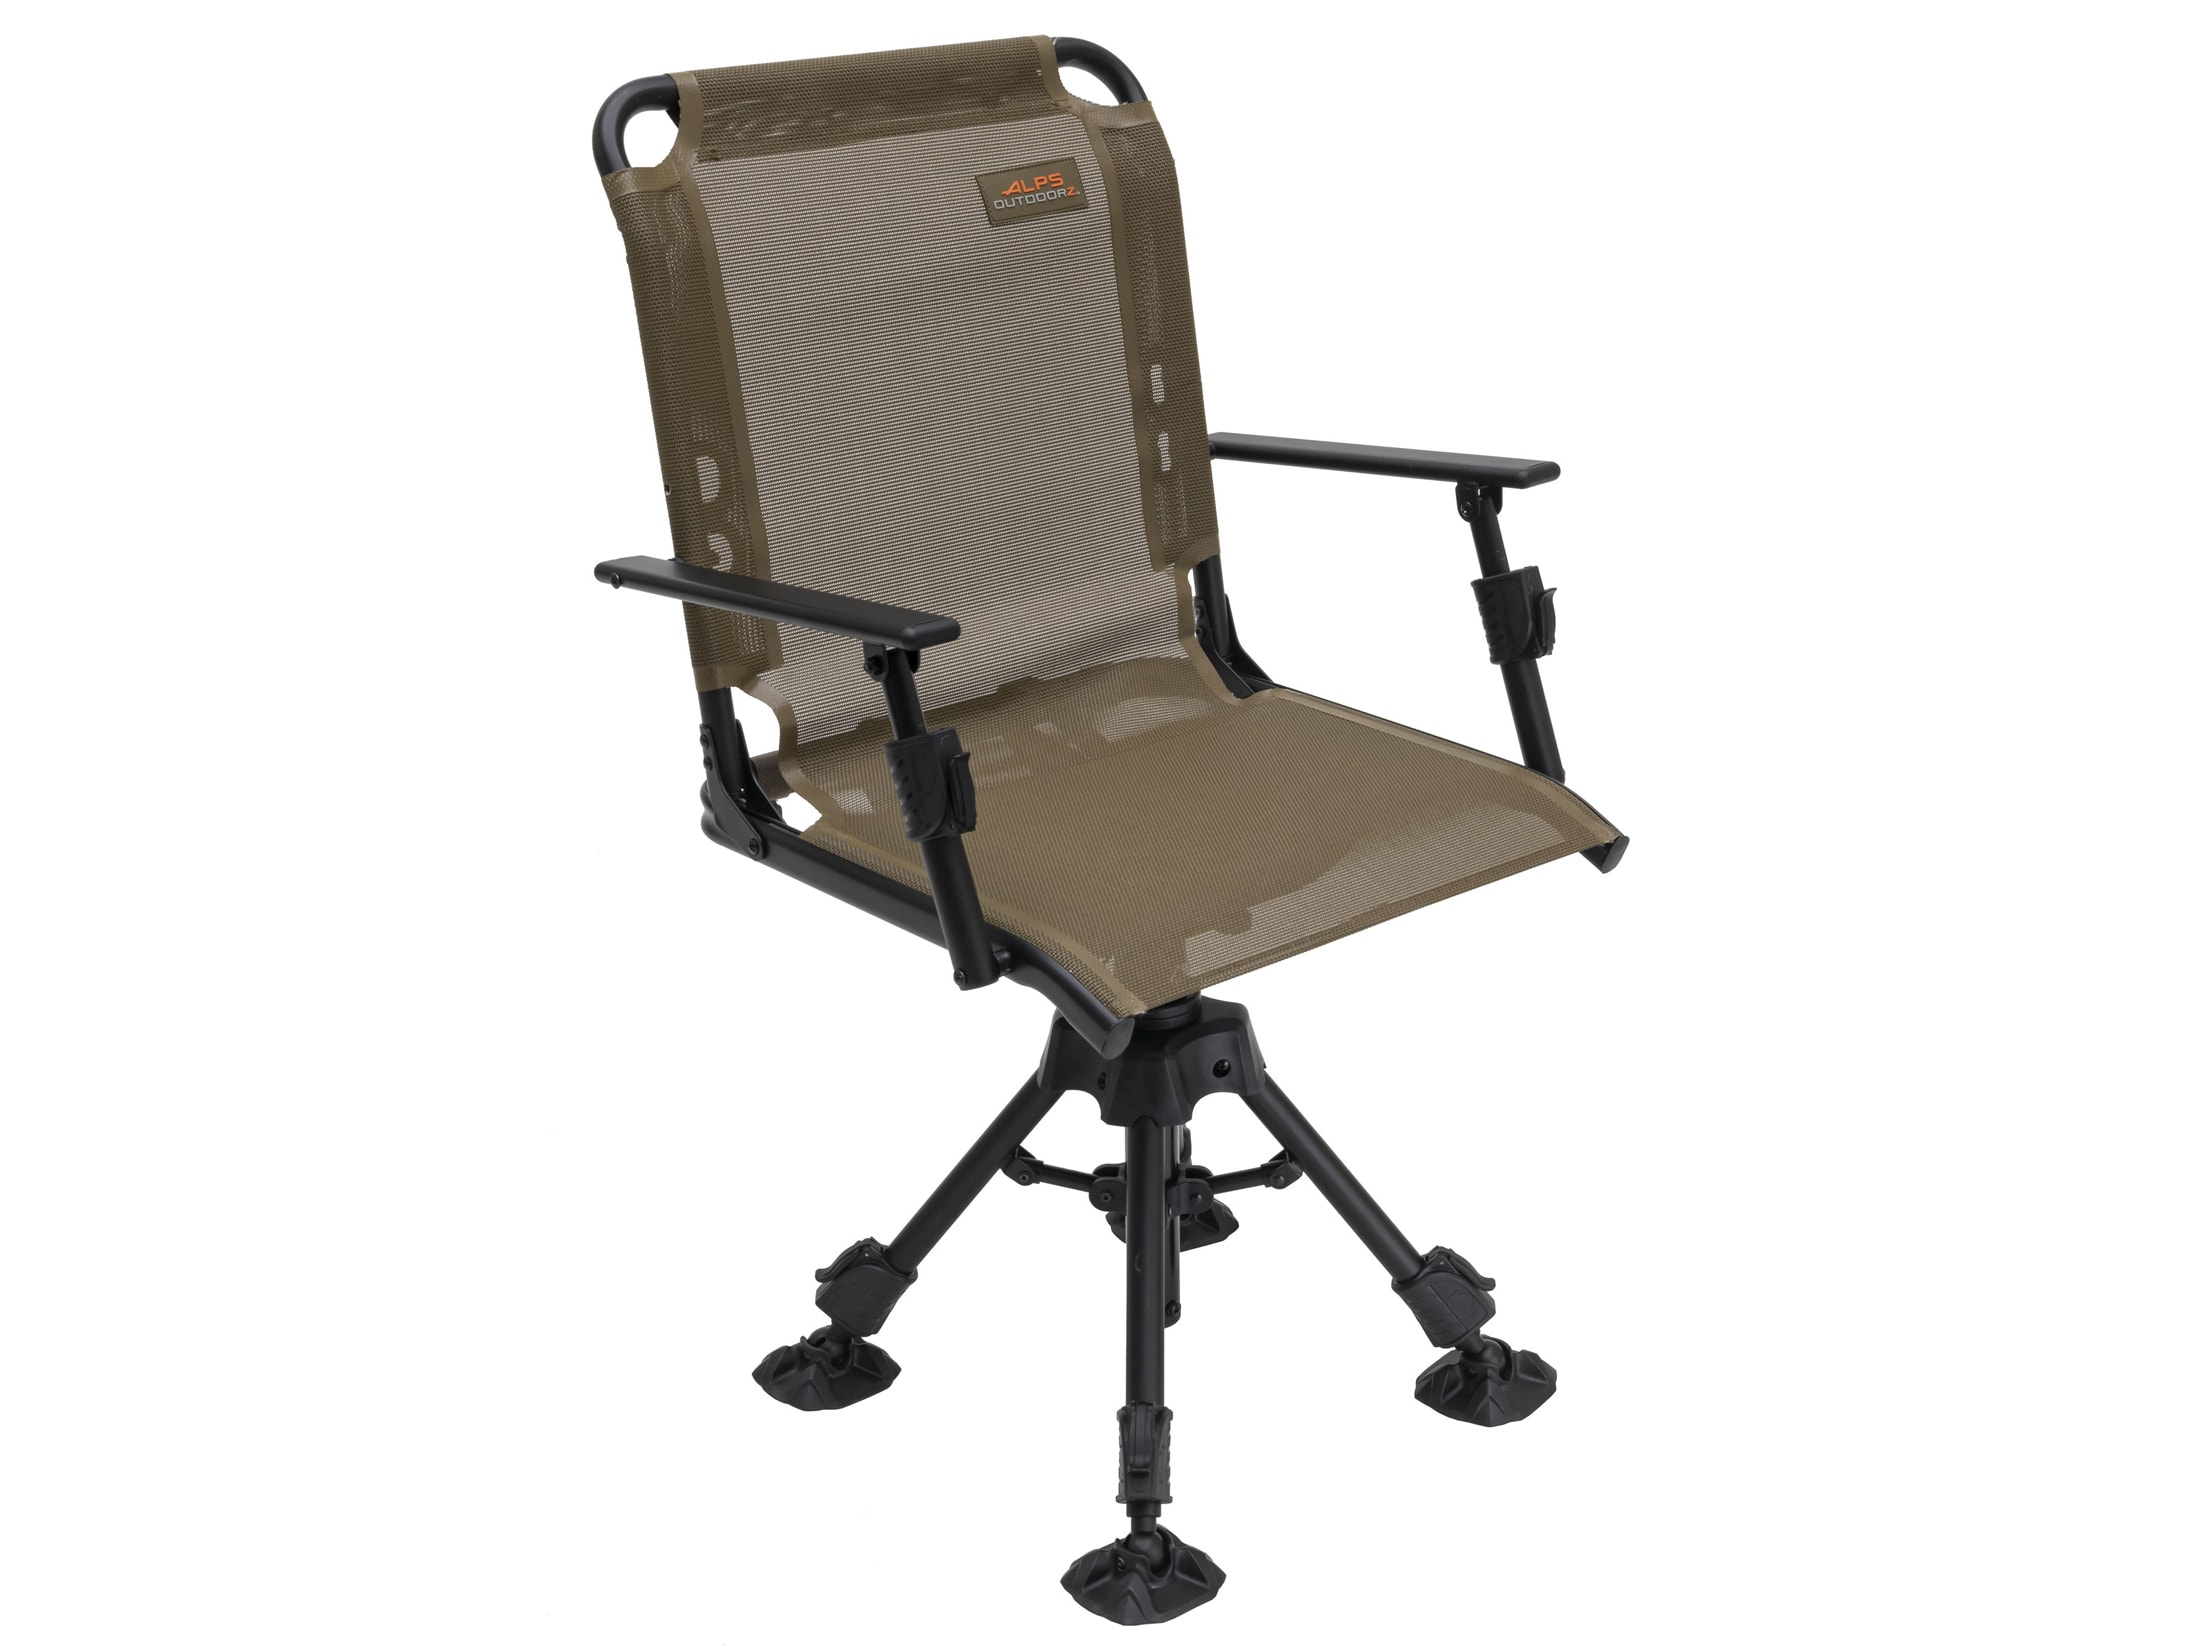 ALPS OutdoorZ Stealth Hunter Deluxe Swivel Chair